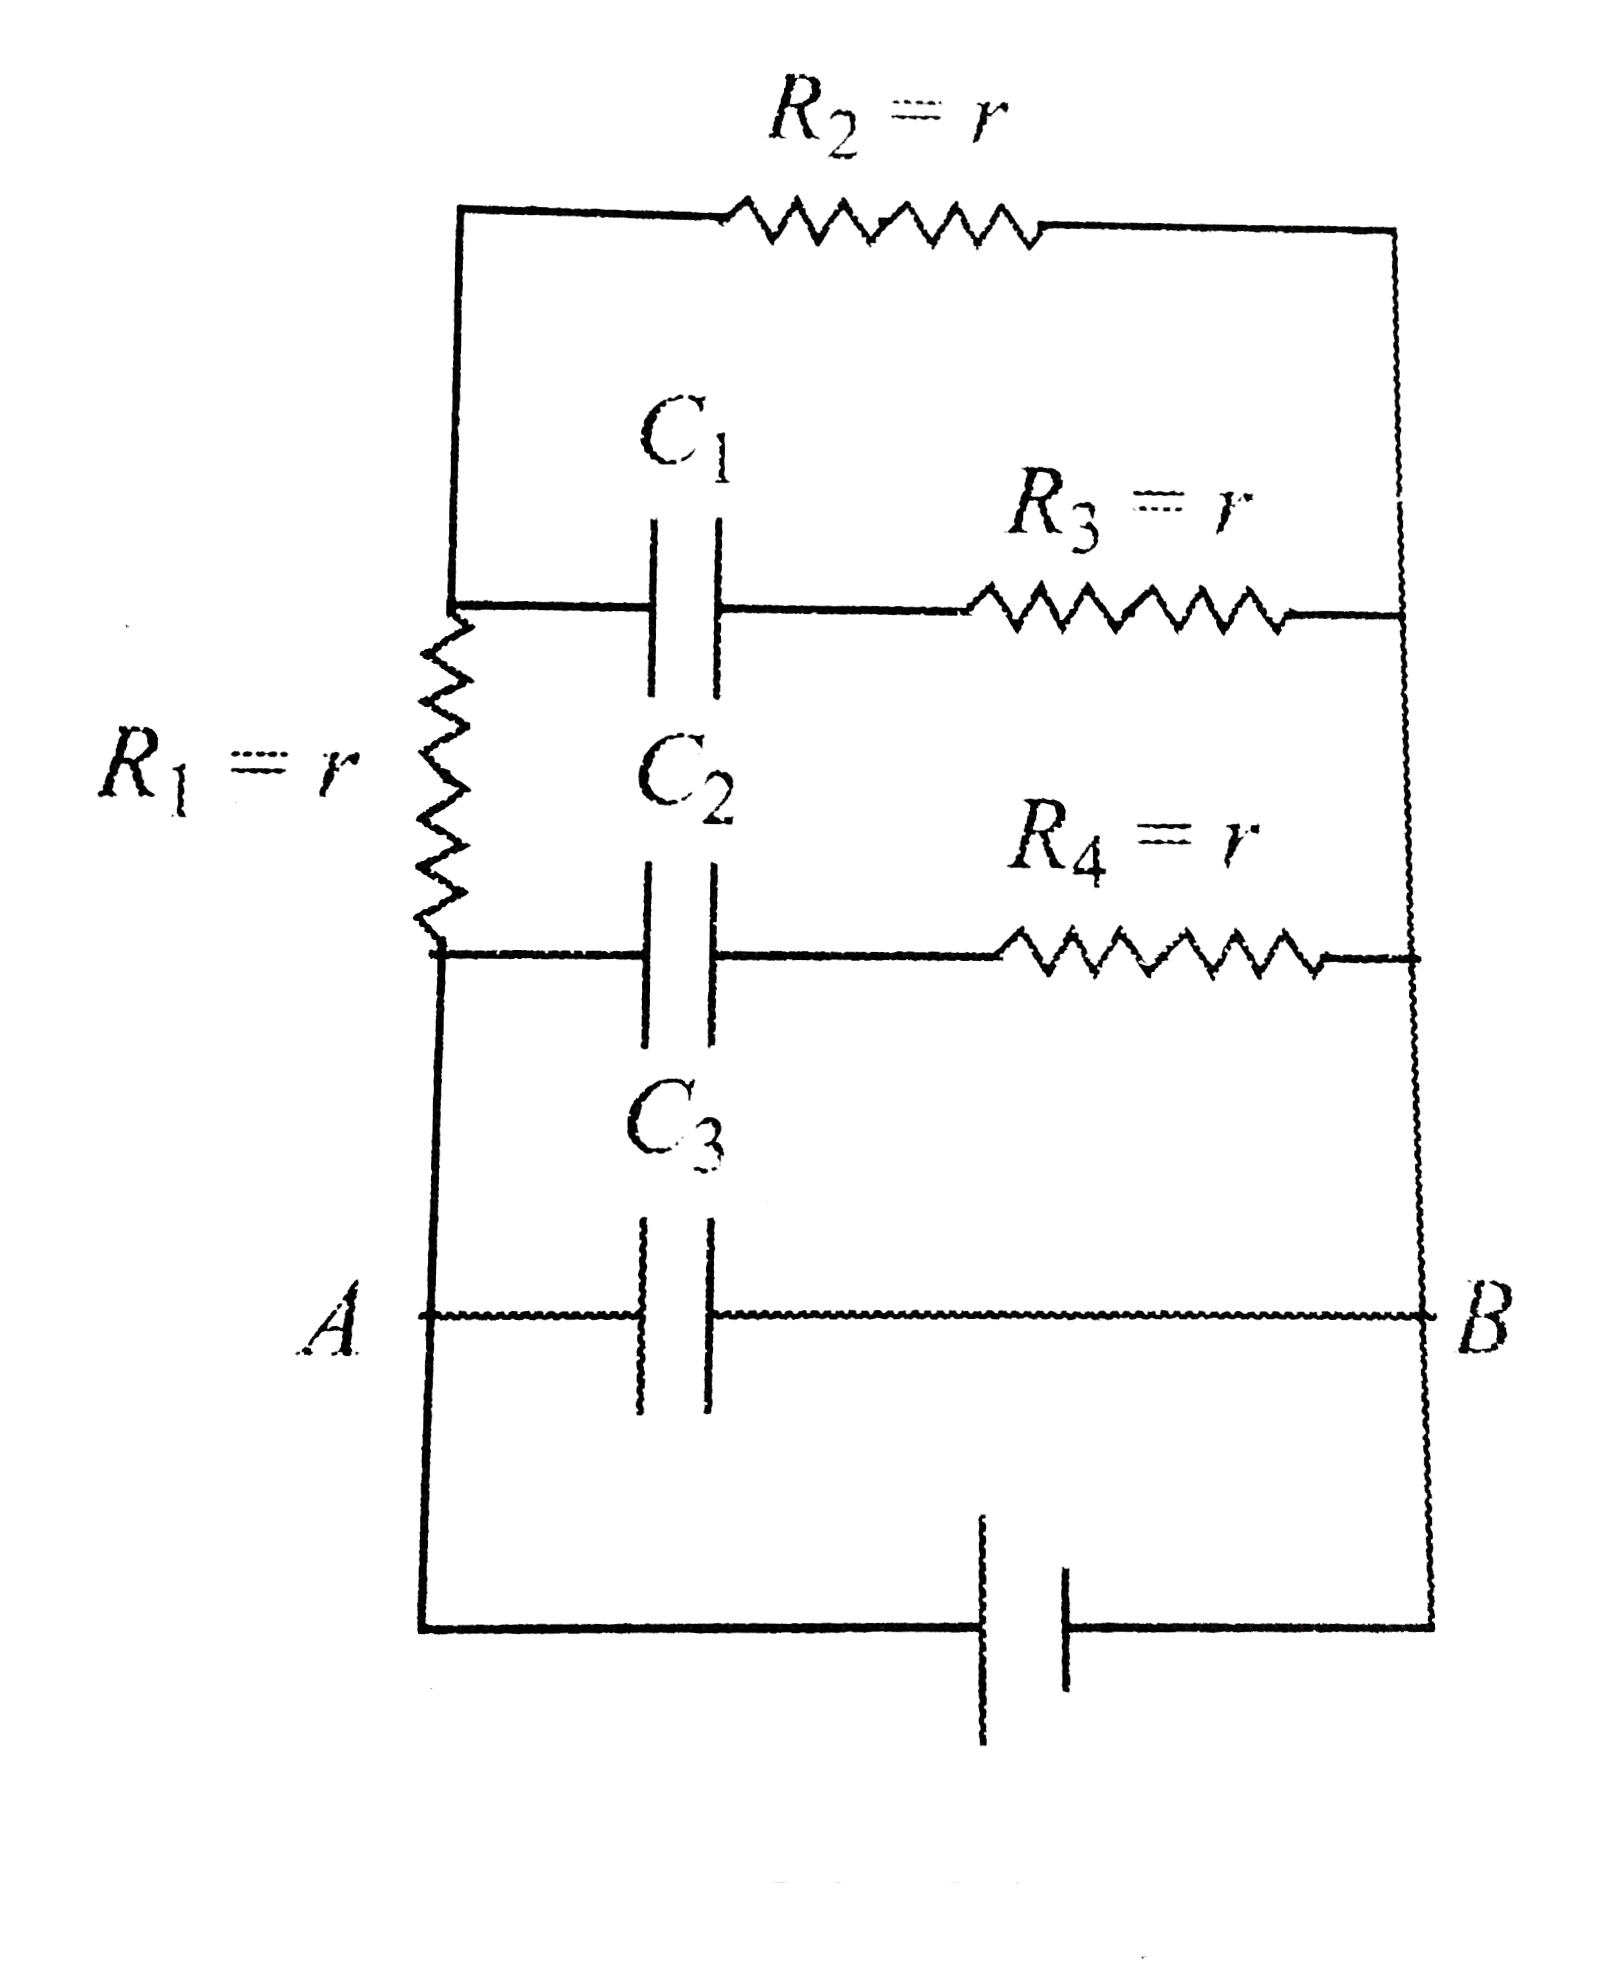 The equivalent resistance between A and B in fig. at steady state will be